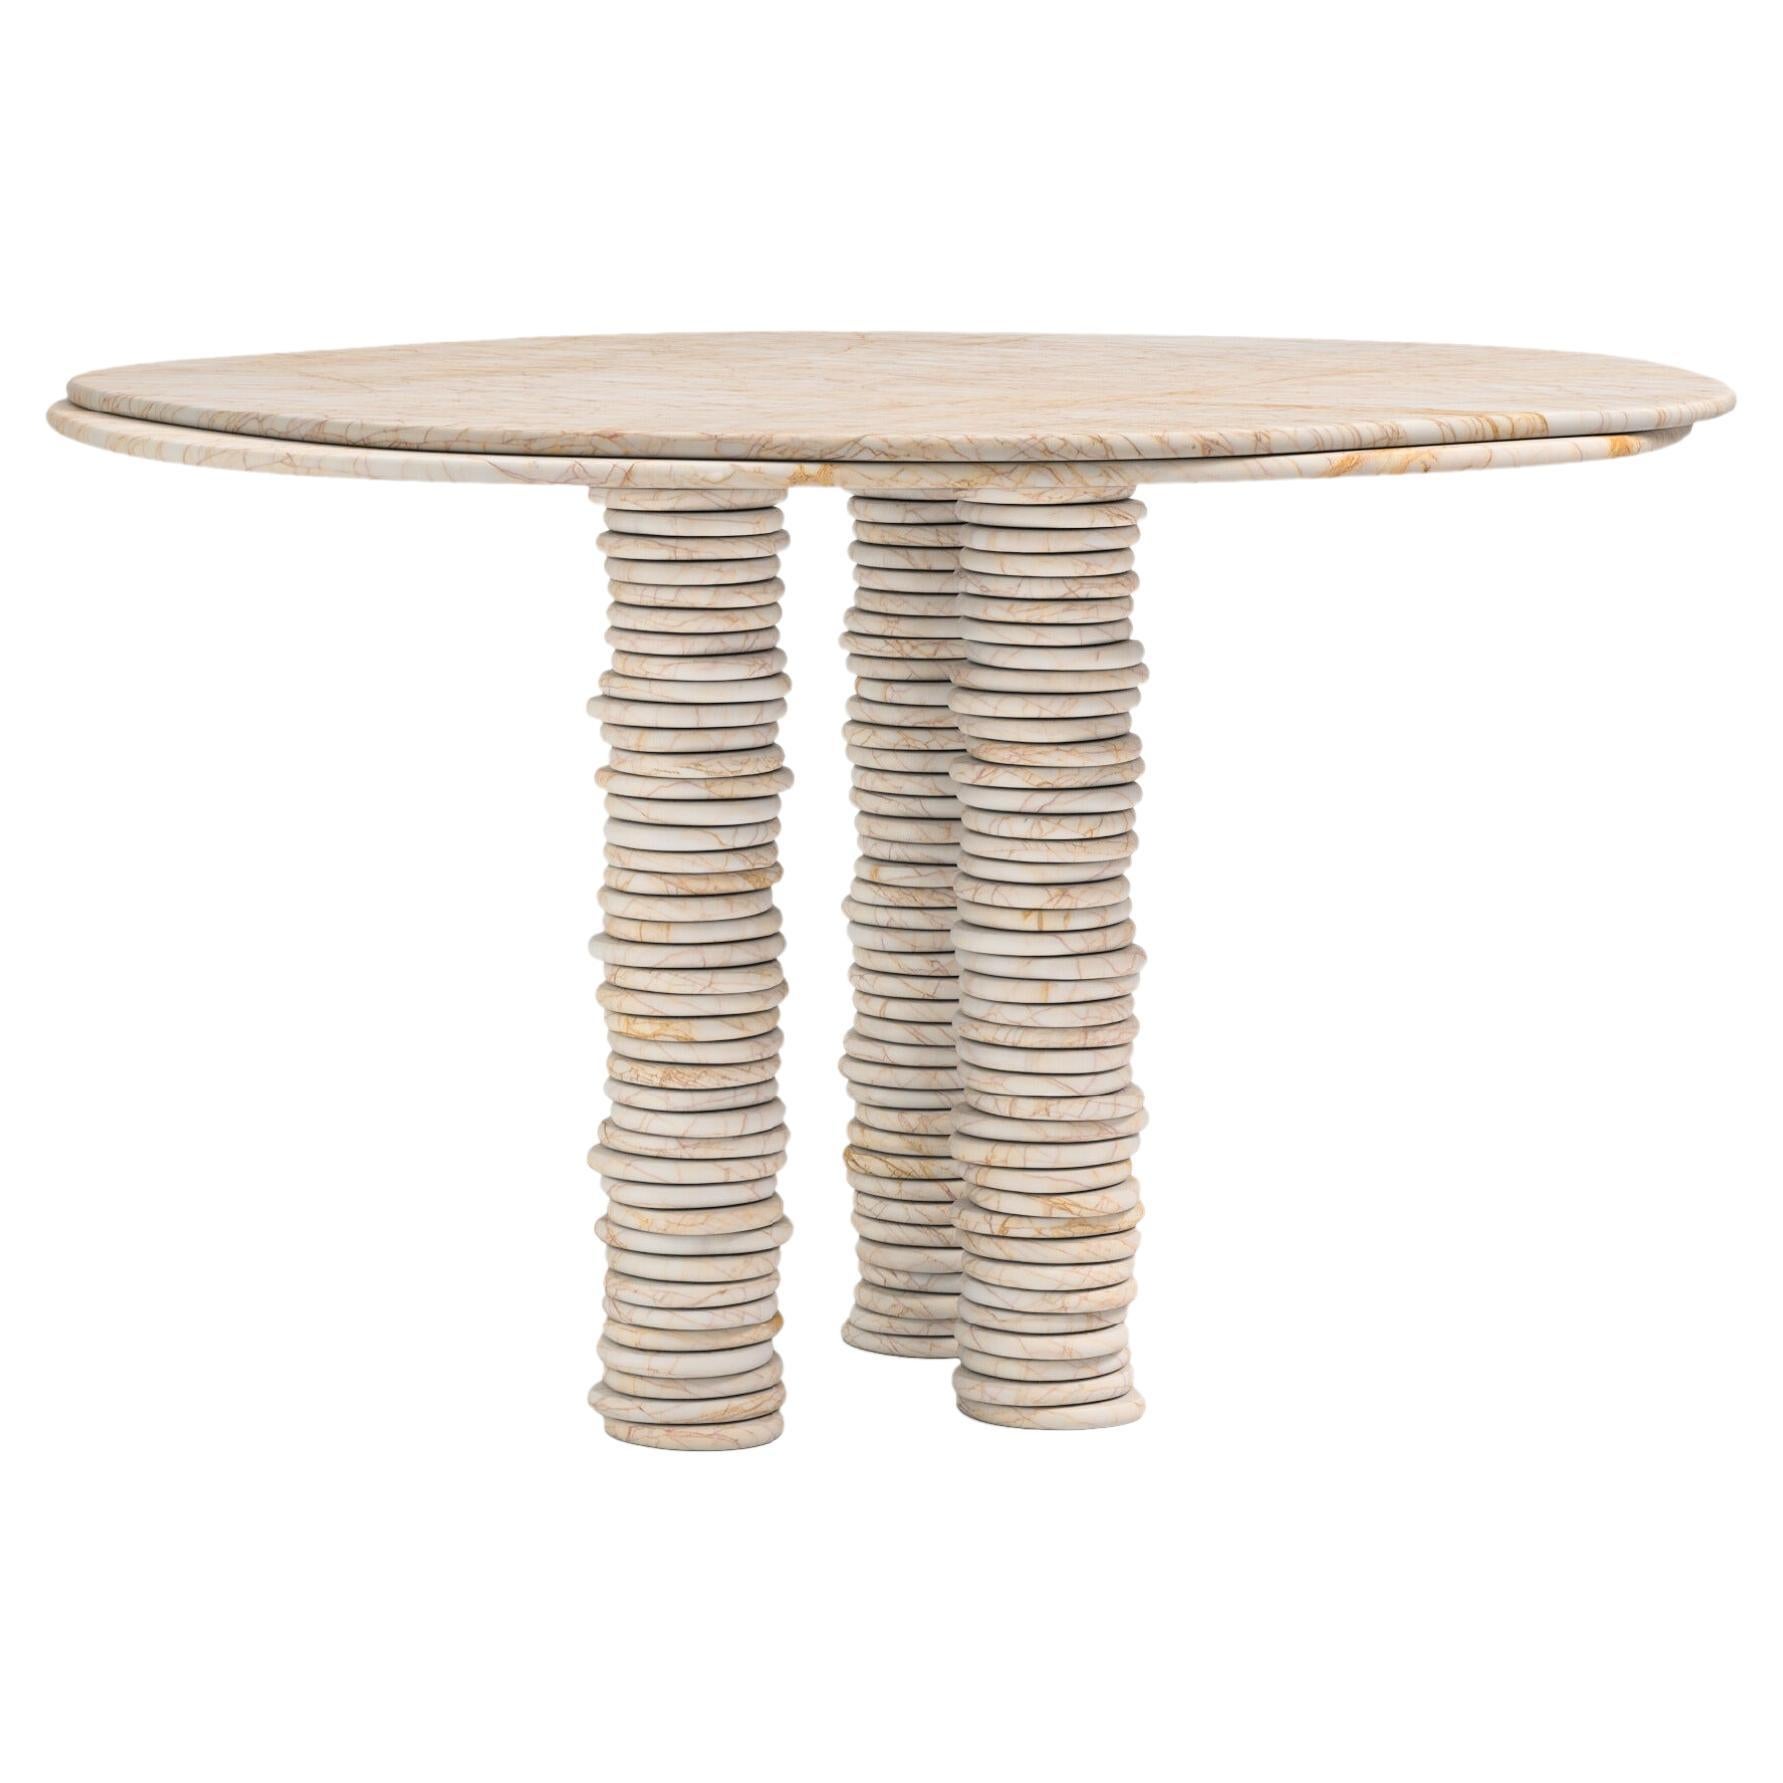 FORM(LA) Onda Round Dining Table 42”L x 42”W x 29”H Golden Spider Marble For Sale